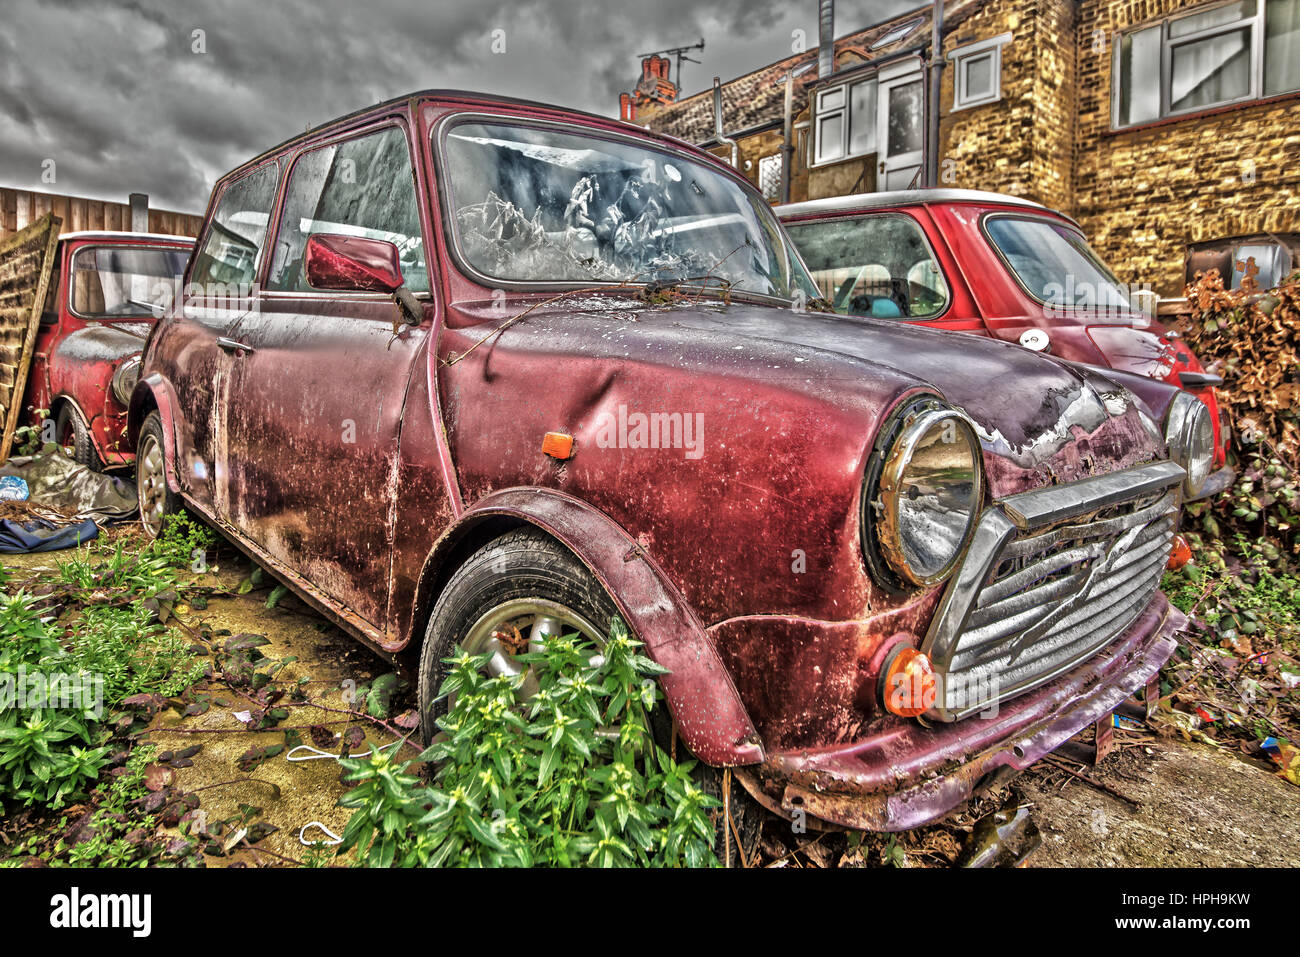 A group of four abandoned British Leyland Minis left to deteriorate on an overgrown parking lot. HDR edited Stock Photo